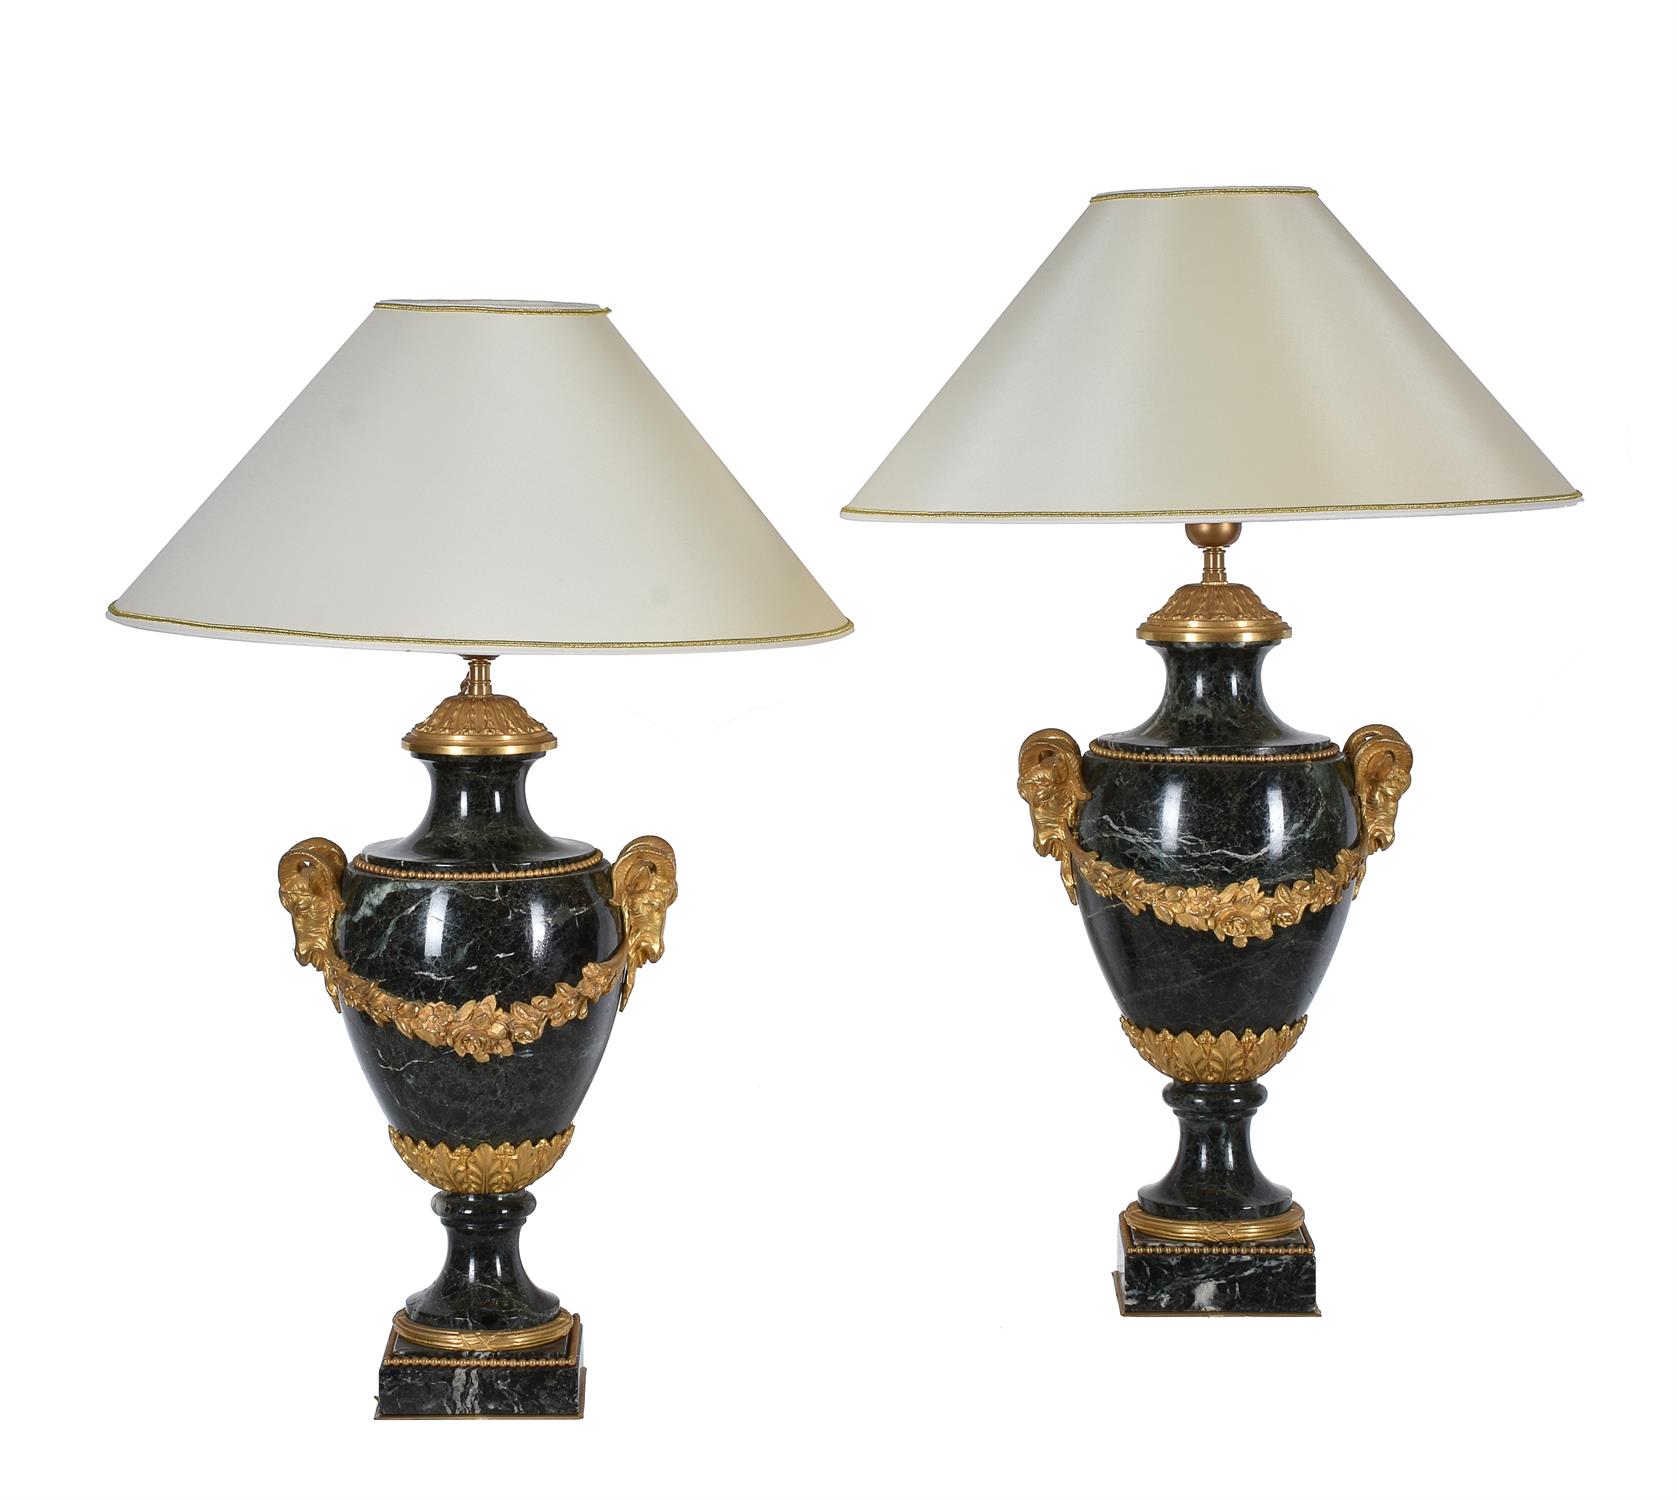 A pair of French green serpentine marble and gilt metal mounted table lamps in Louis XVI style